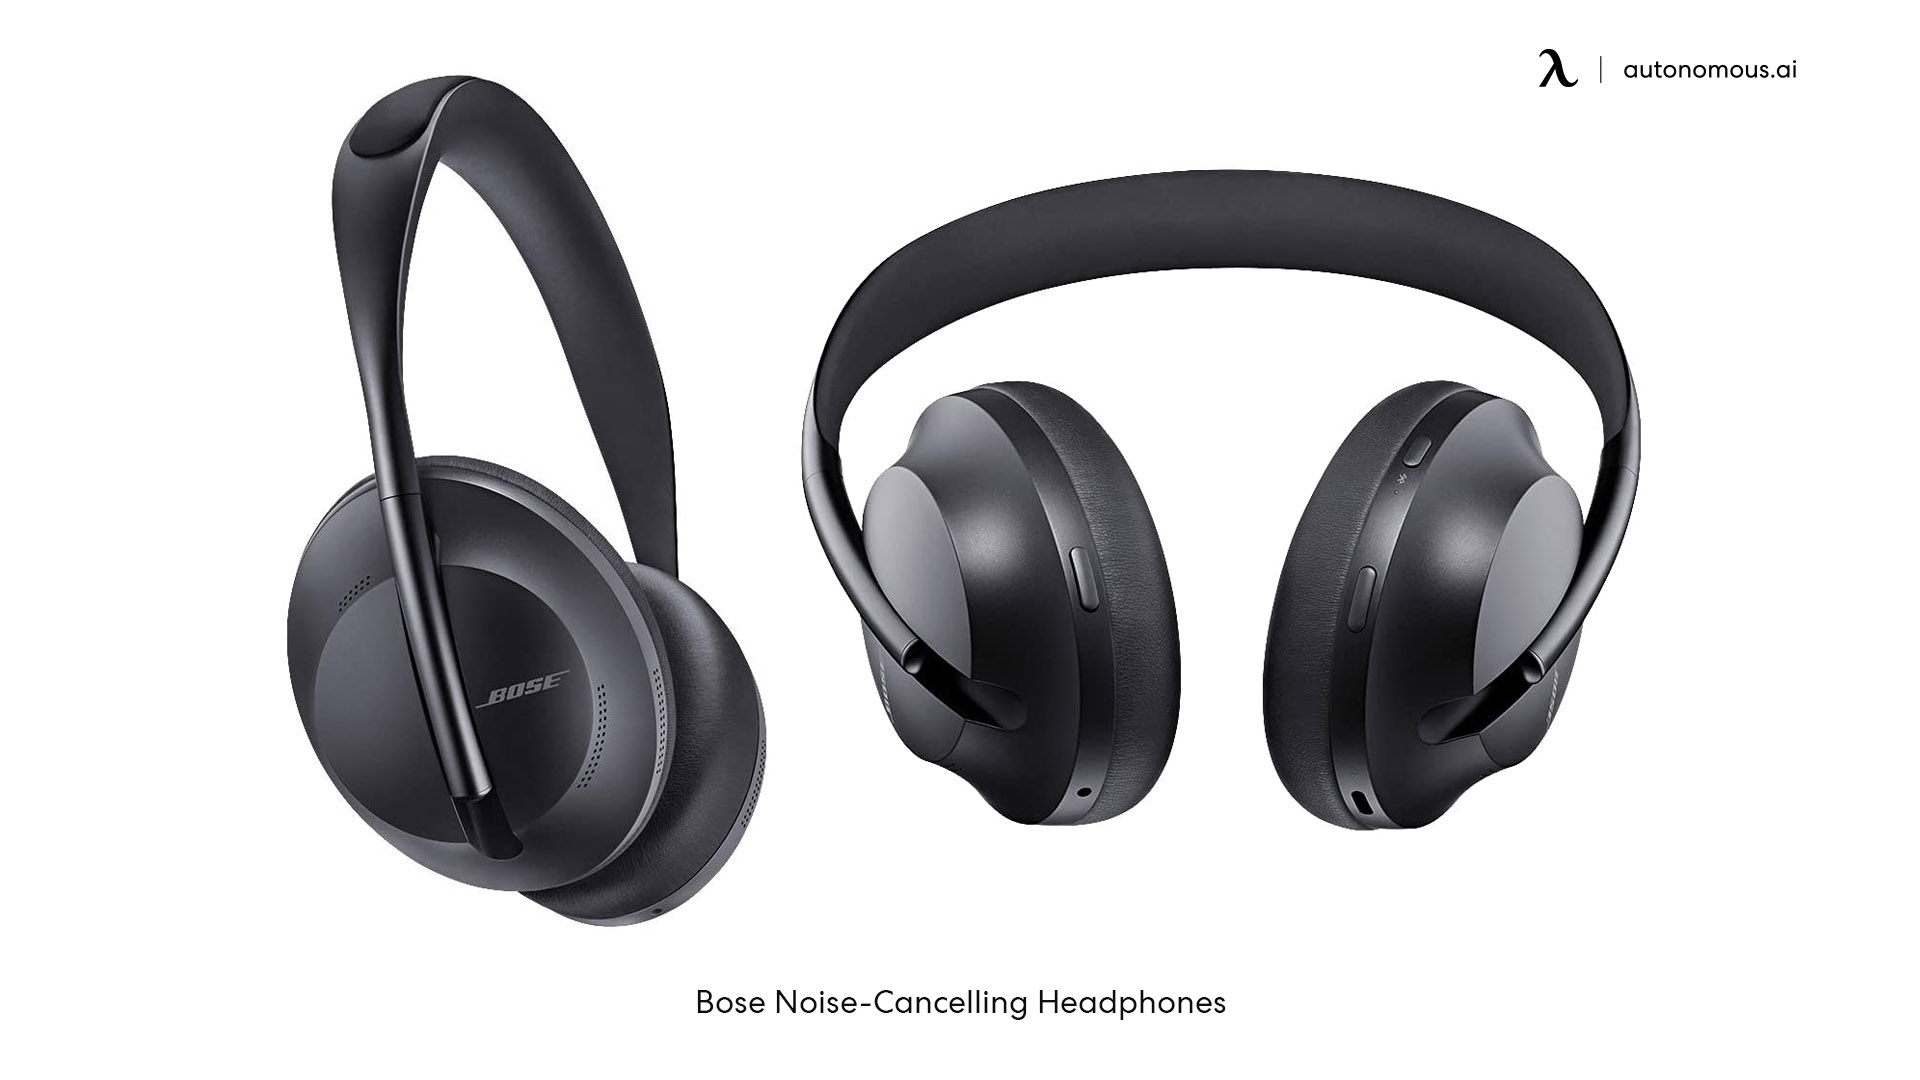 Bose Noise-Cancelling Work from Home Headsets